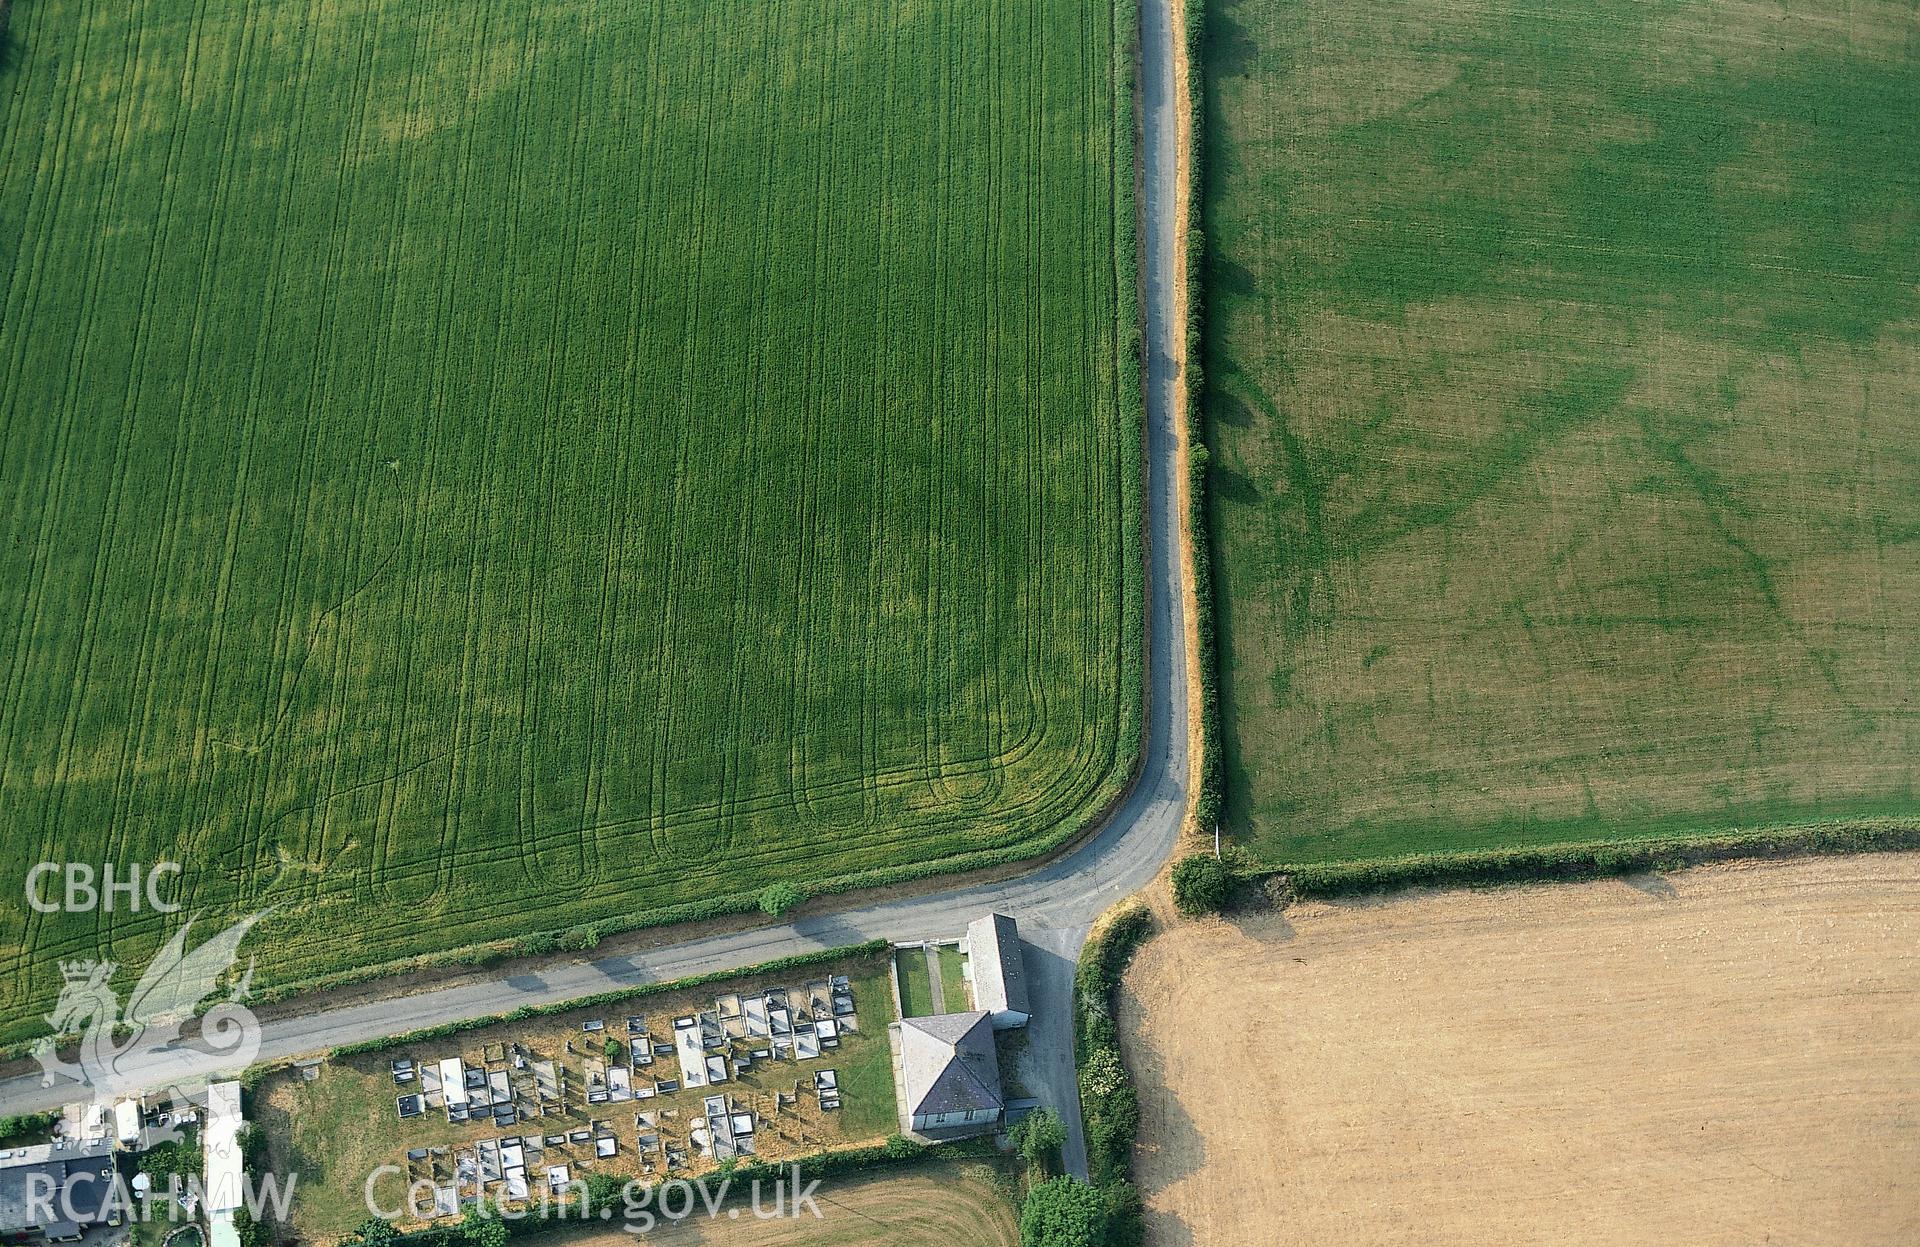 RCAHMW colour oblique aerial photograph of a cropmark enclosure east of Treferedd Uchaf taken on 08/07/1995 by C.R. Musson